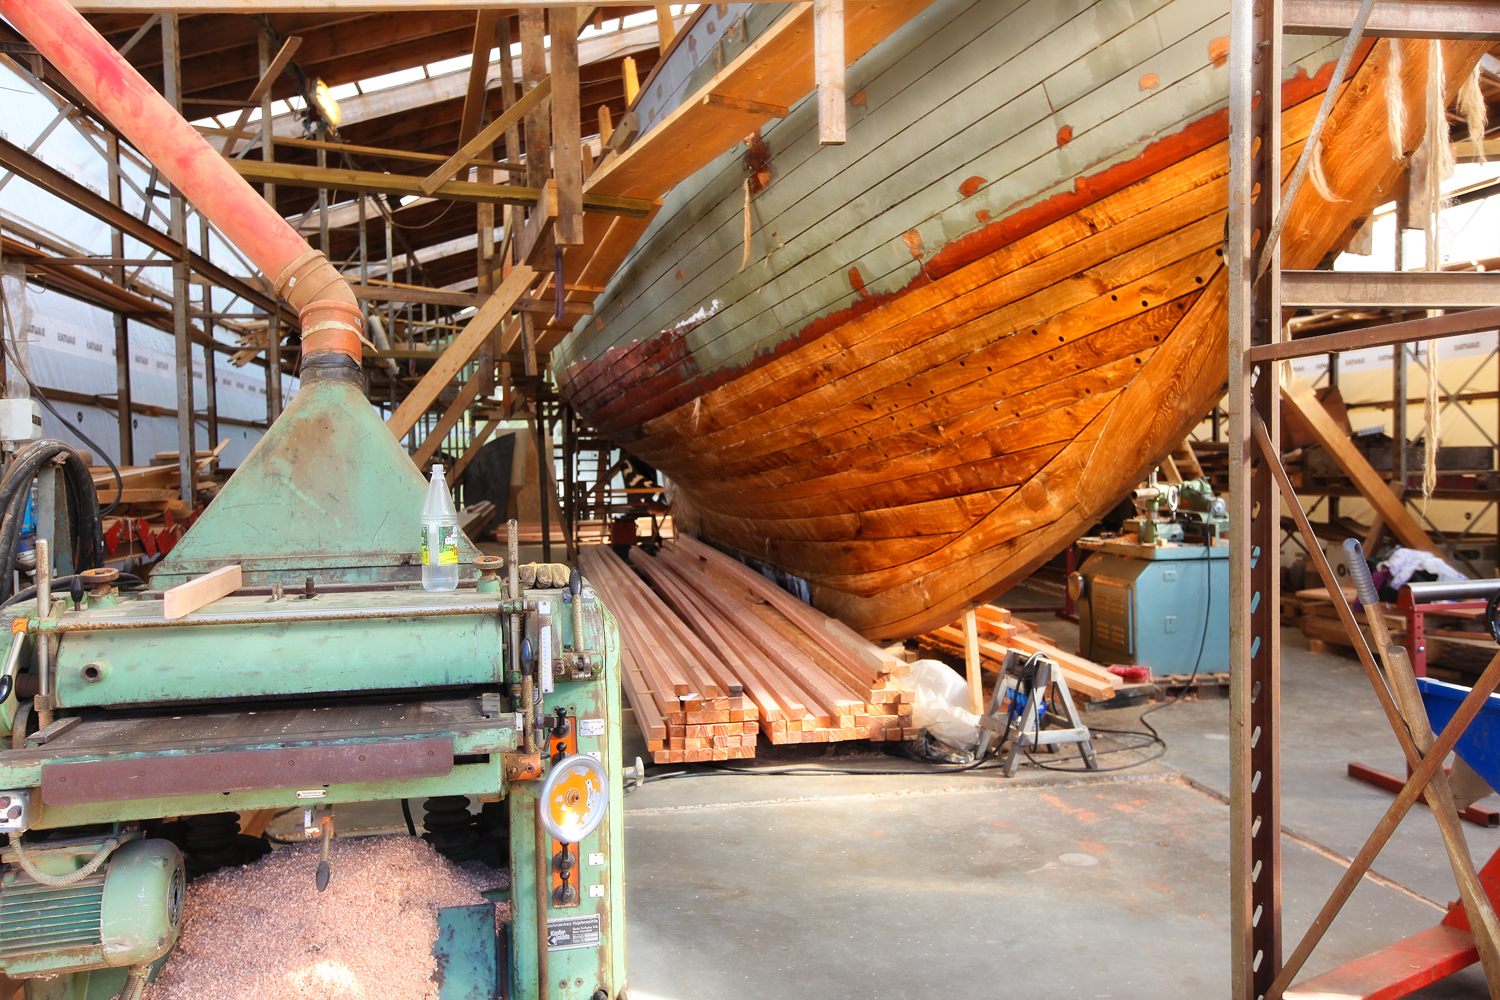   The Maritime Center shipyard is located in the famous boat builder Bjarne Aas' old mast house. The shipyard specializes in wooden boats. They are now a highly recognized center of excellence for the protection of vessels. Here, owners of traditiona